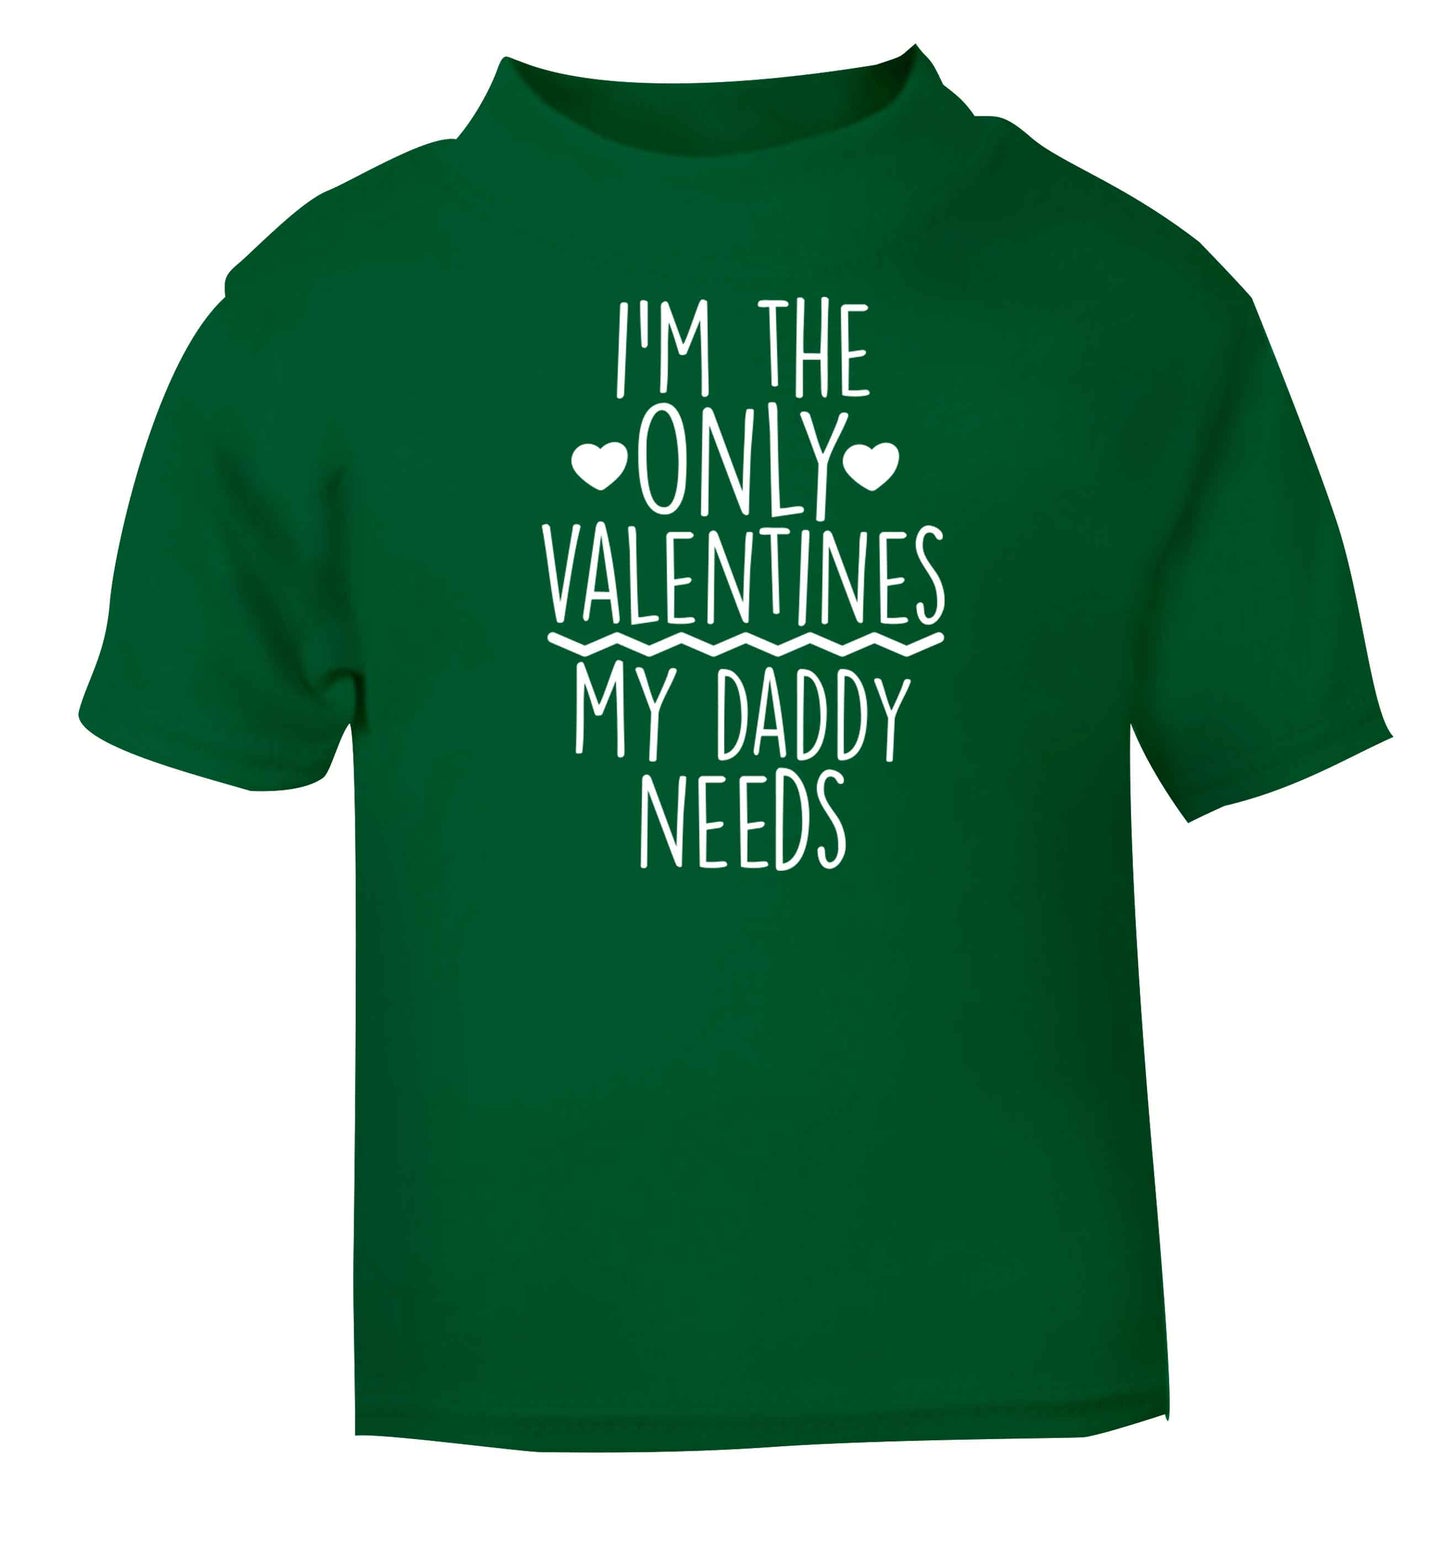 I'm the only valentines my daddy needs green baby toddler Tshirt 2 Years